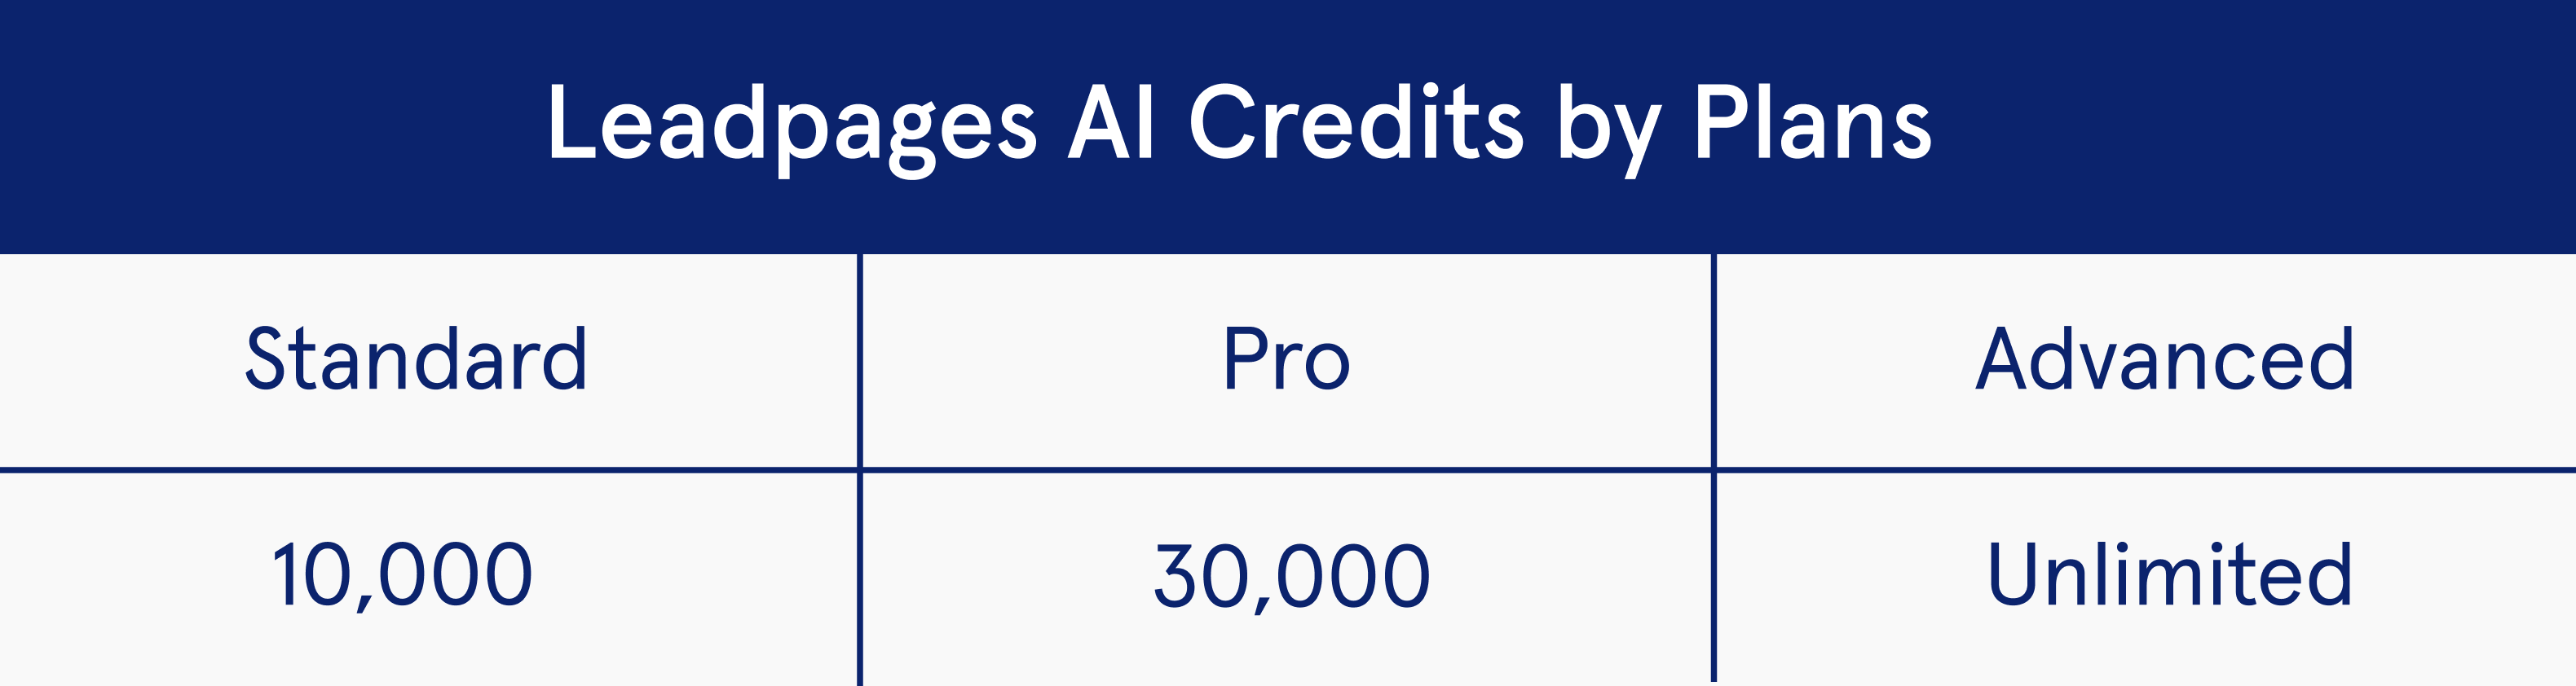 Leadpages AI credits overview